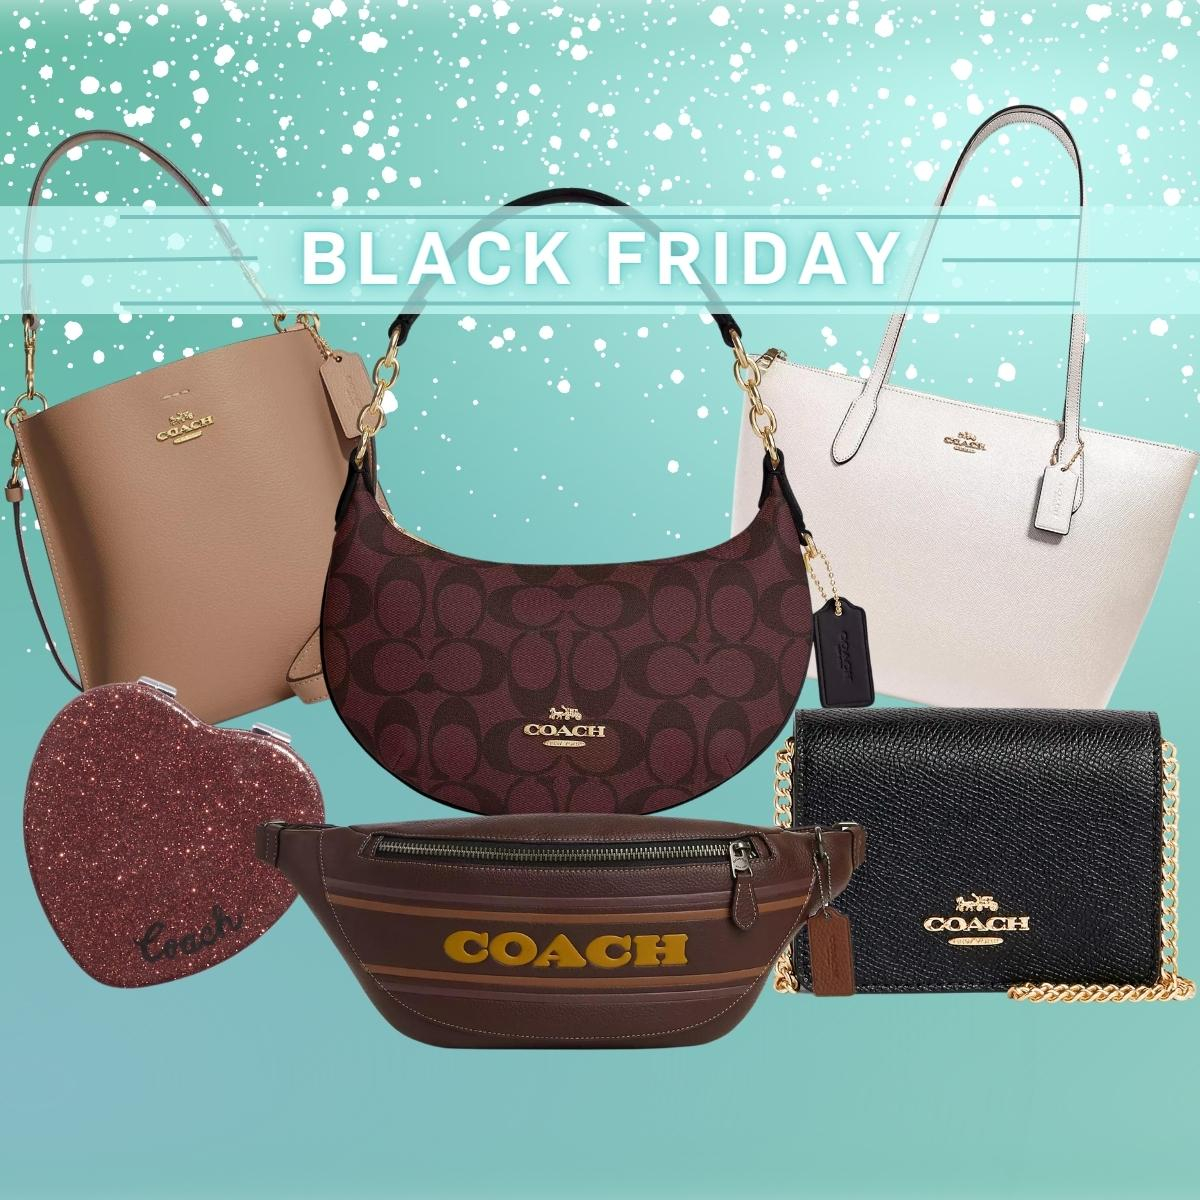 Coach Outlet’s Black Friday Sale Is Here